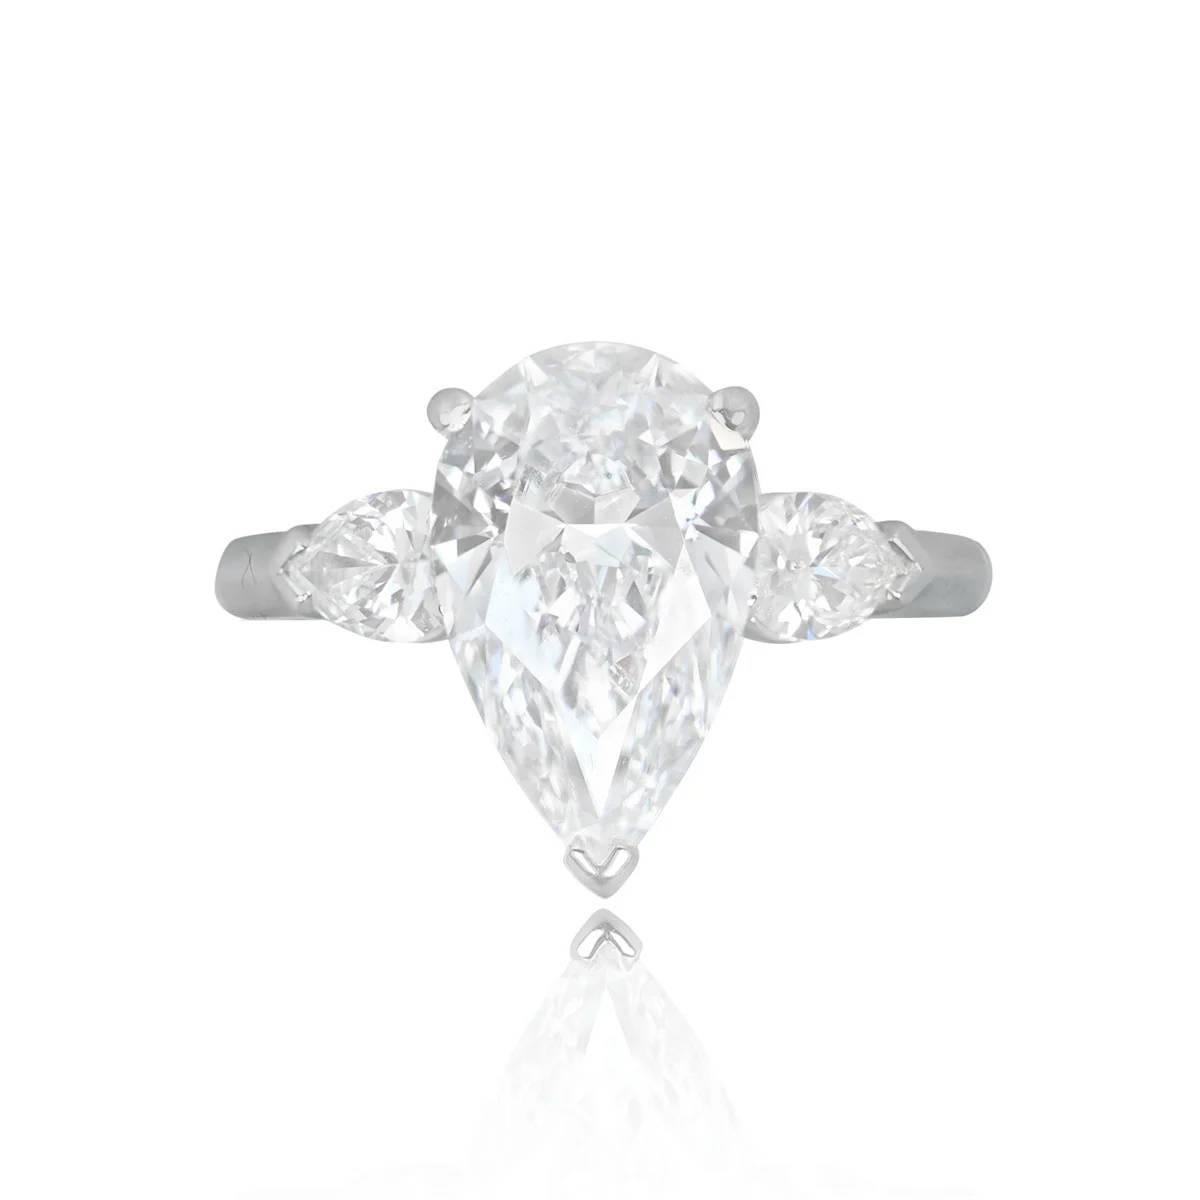 Graff platinum and diamond ring exuding elegance with a GIA-certified 3.41-carat pear-shaped center diamond (D color, IF clarity). The shoulders feature two additional pear-shaped diamonds, totaling approximately 0.60 carats. Handcrafted in platinum